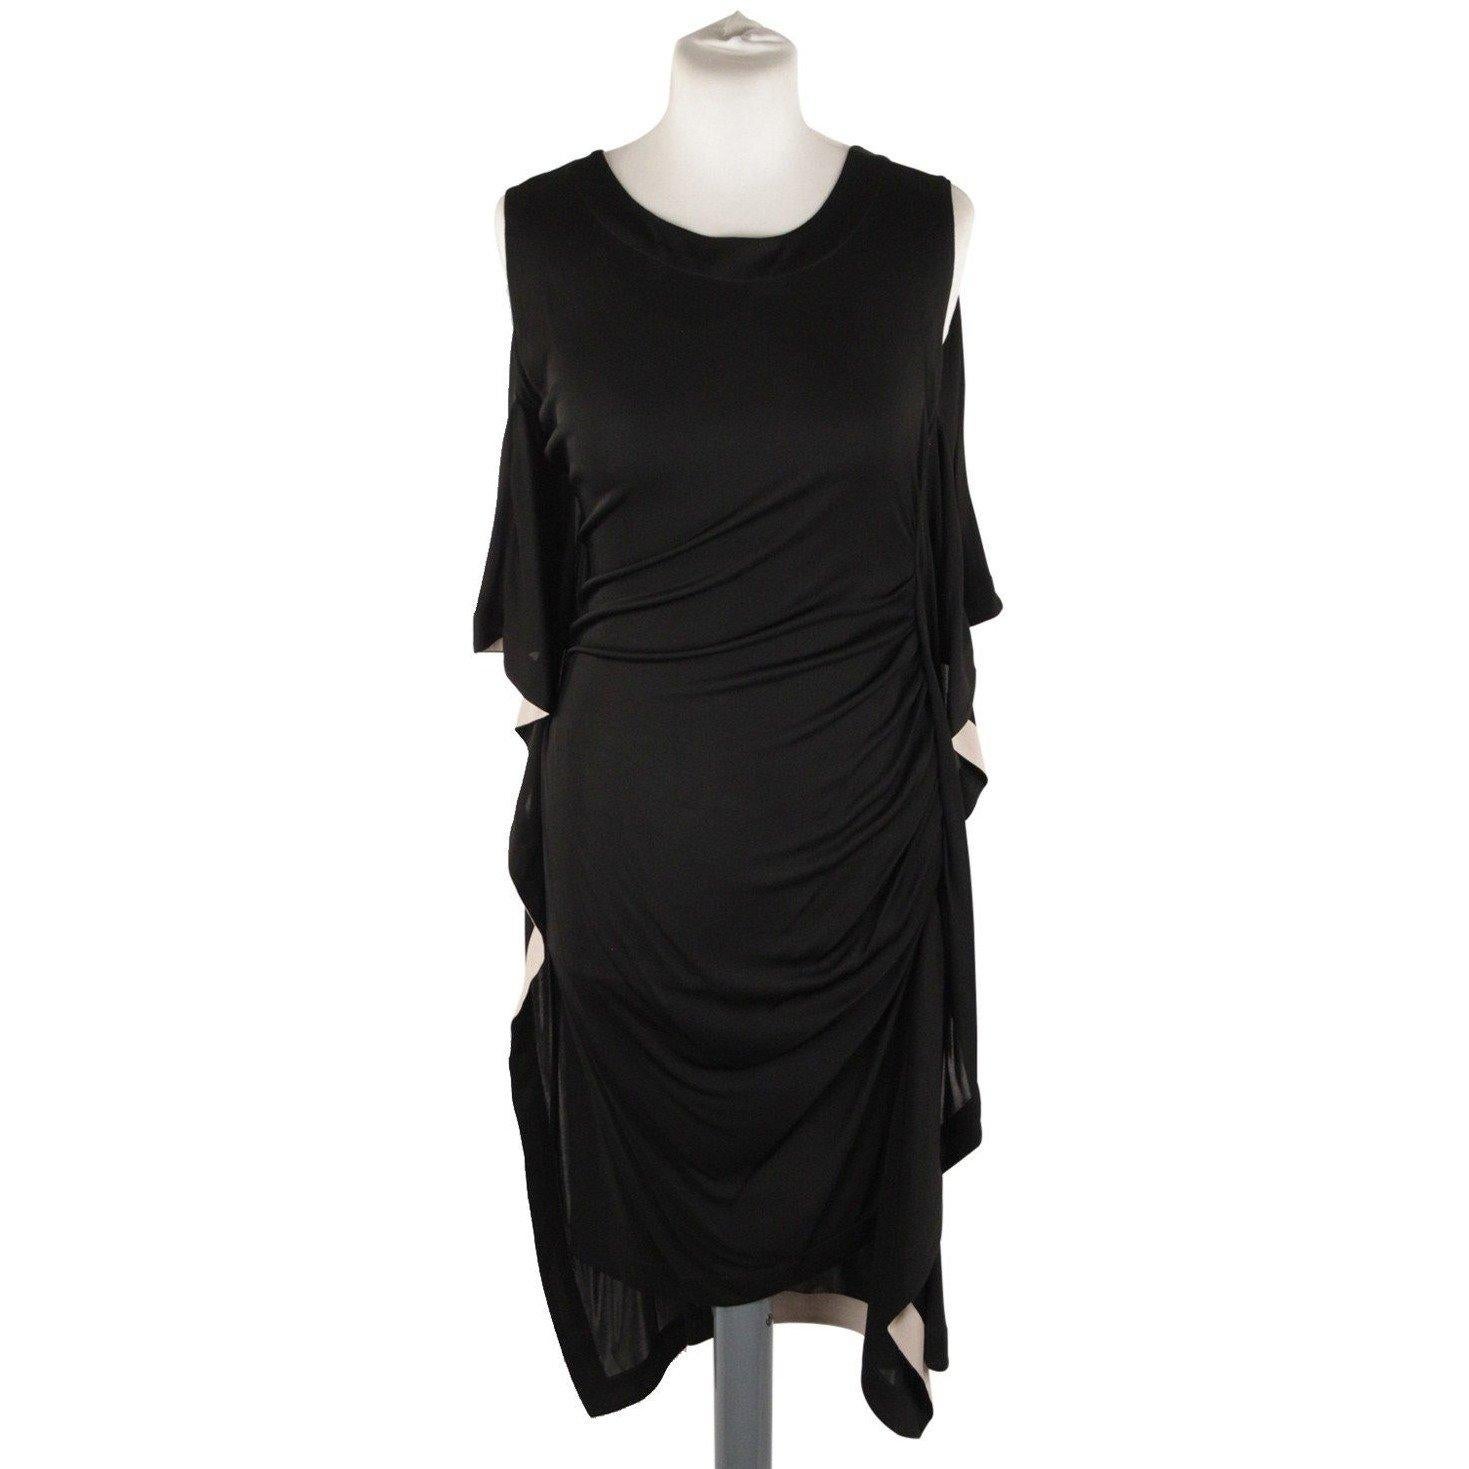 Vionnet Black Silky Sleeveless Dress Knee Lenght with Frills . Black silky sleeveless dress . Round neck. Sleeveless design. Frilled side. Draped detailing on the side. Contrast trim. Size is not indicated. Estimated size is a SMALL size. Made in